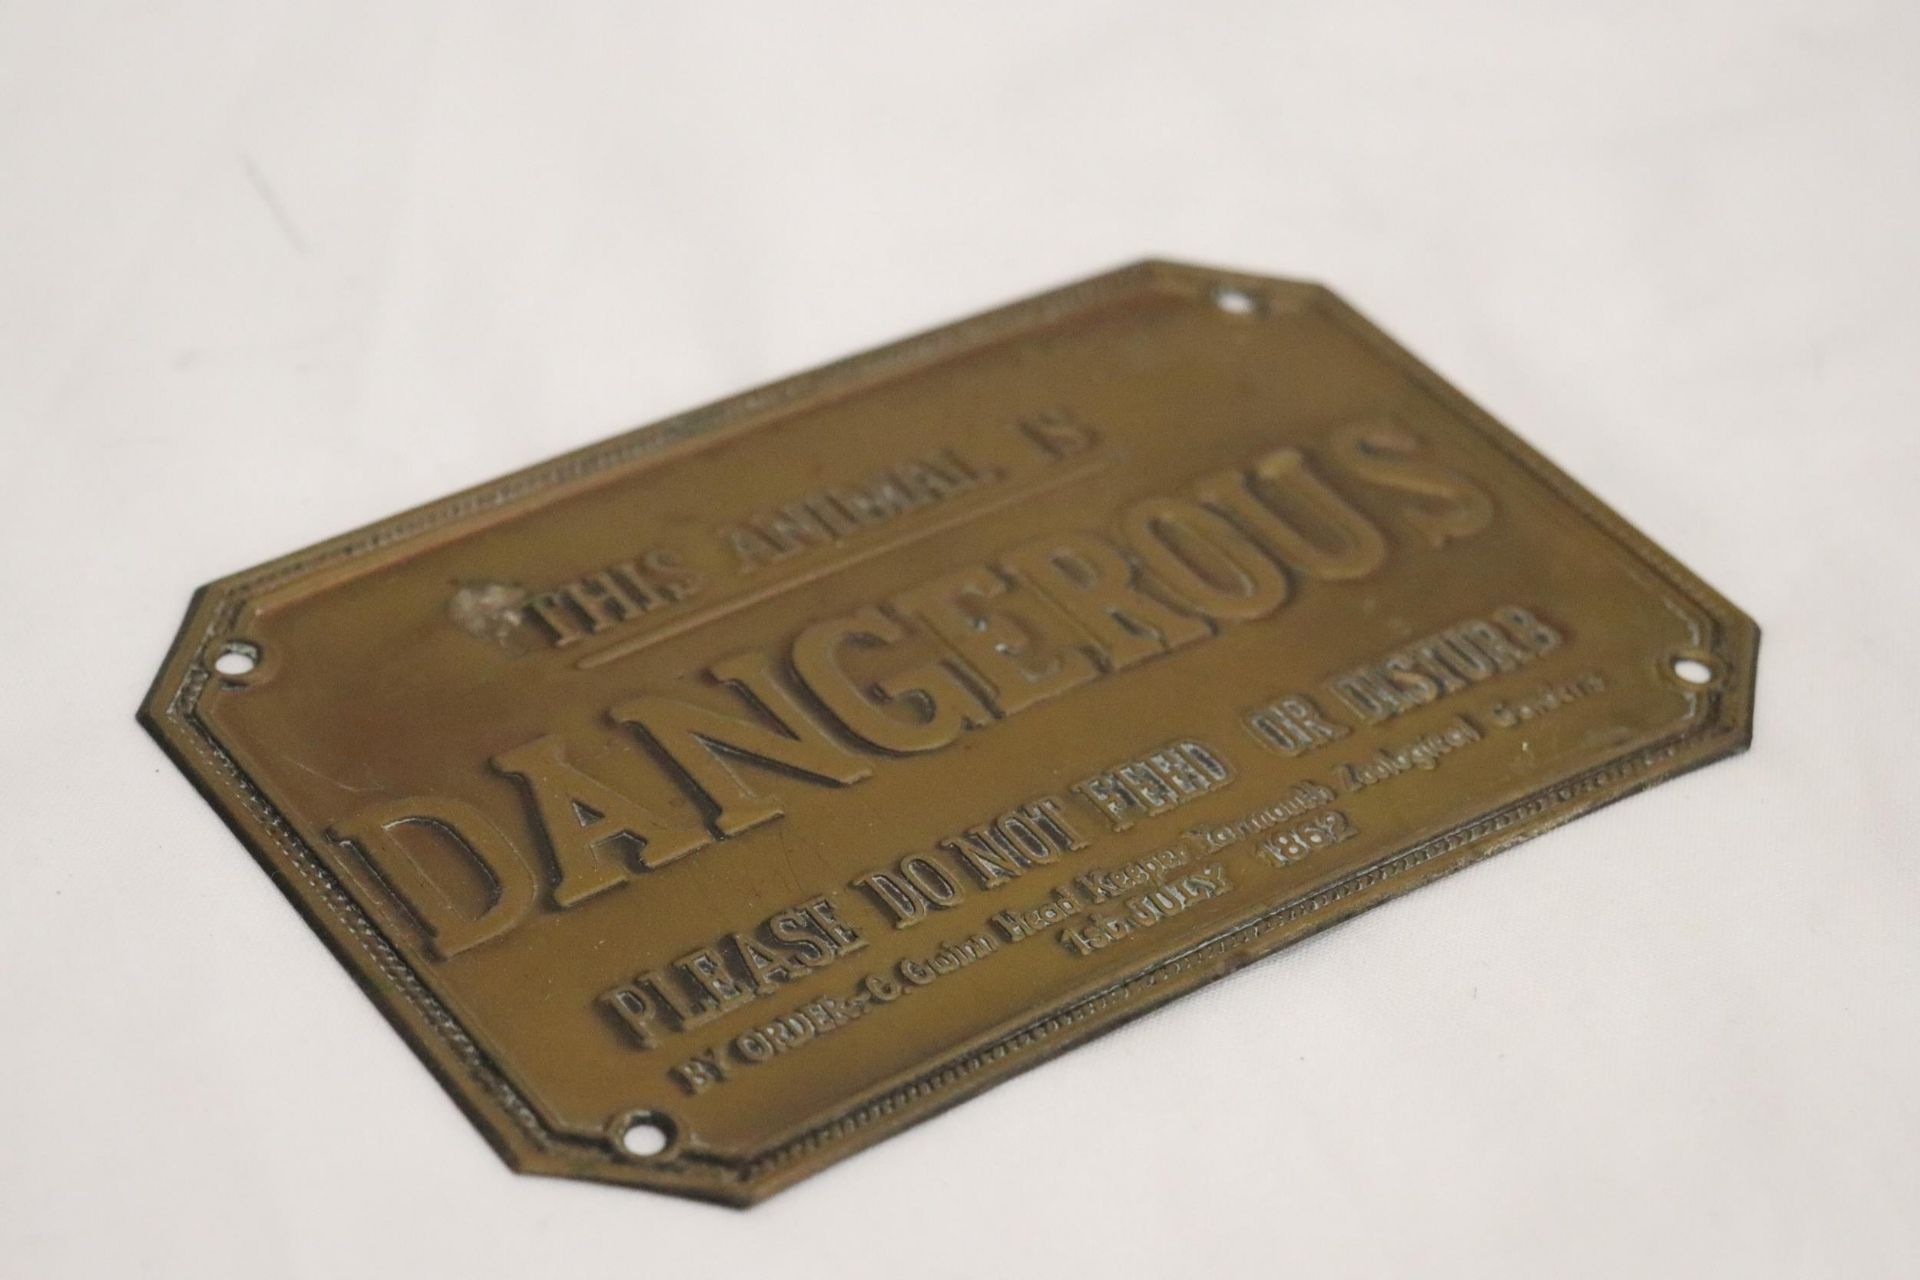 A VINTAGE BRASS PLATE "THIS ANIMAL IS DANGEROUS" DATED 1ST JULY 1862 - Image 2 of 4